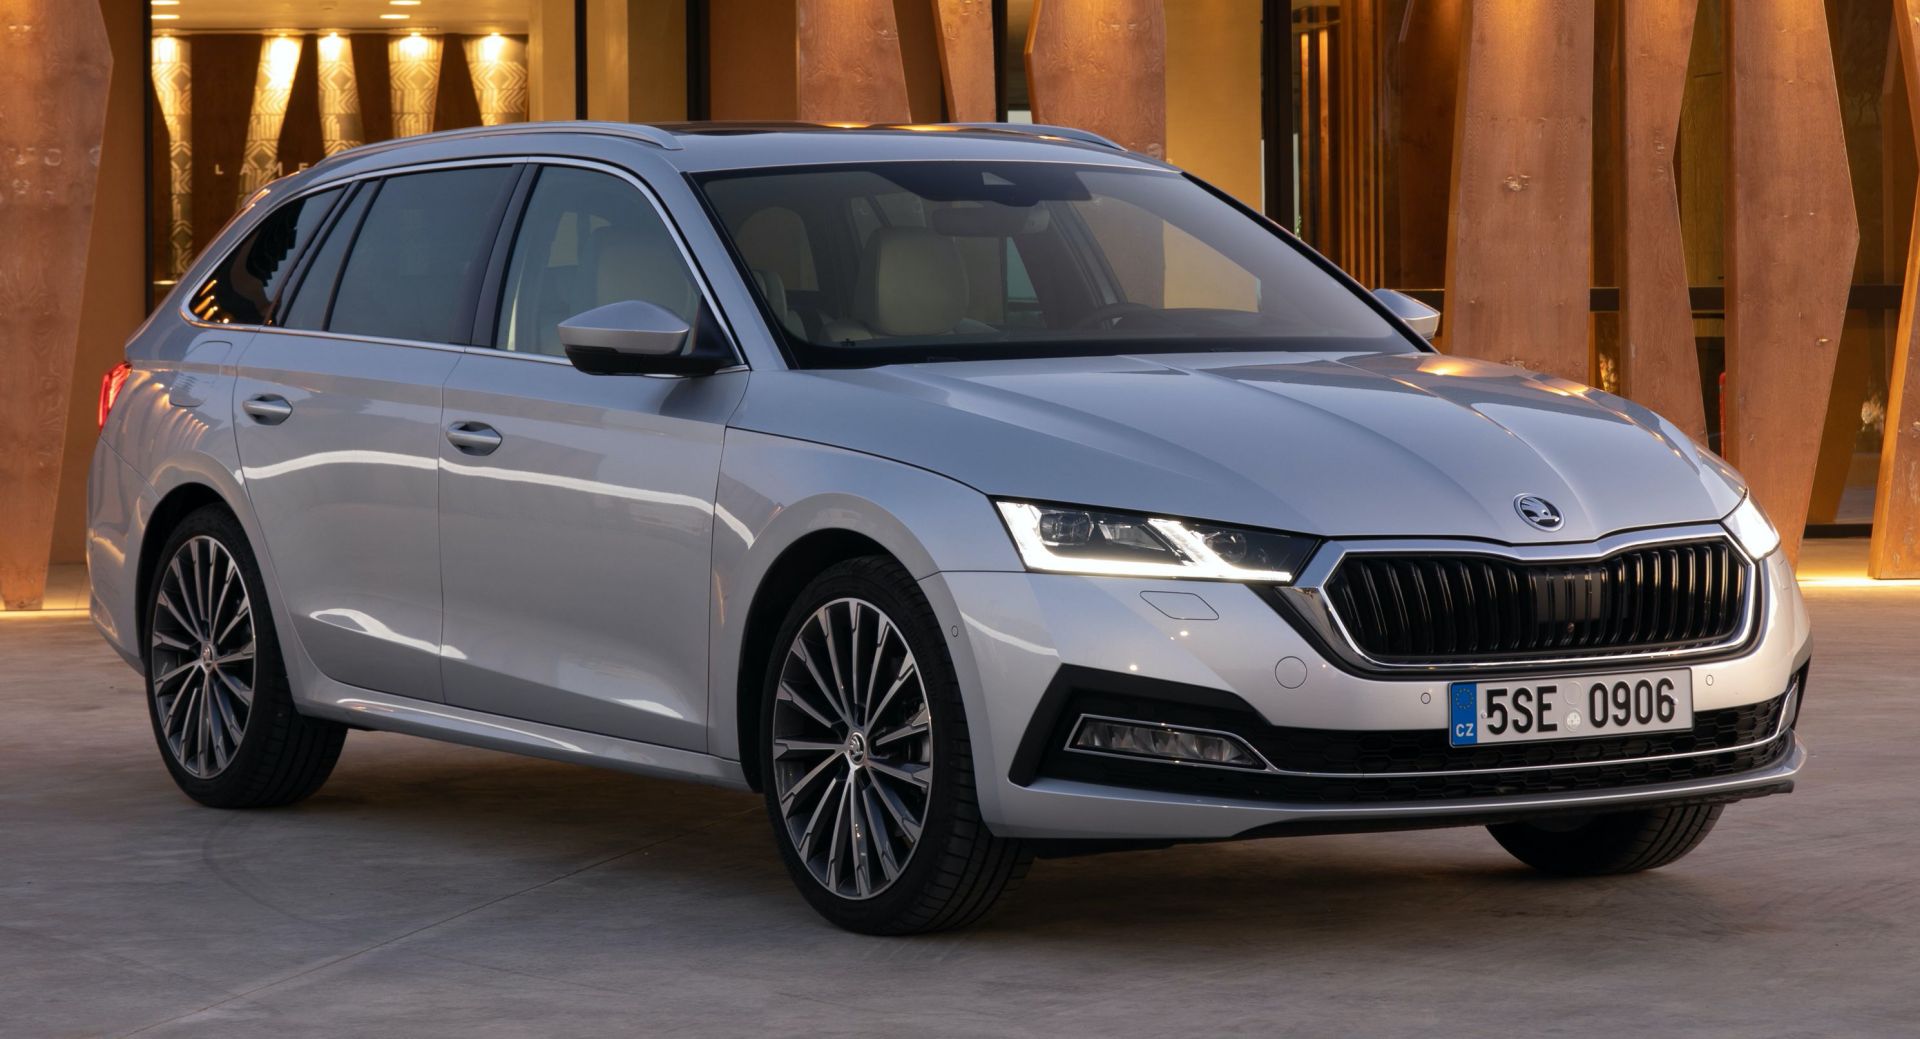 2020 Skoda Octavia Combi: Successor To Europe's Best-Selling Wagon Detailed  Before Launch